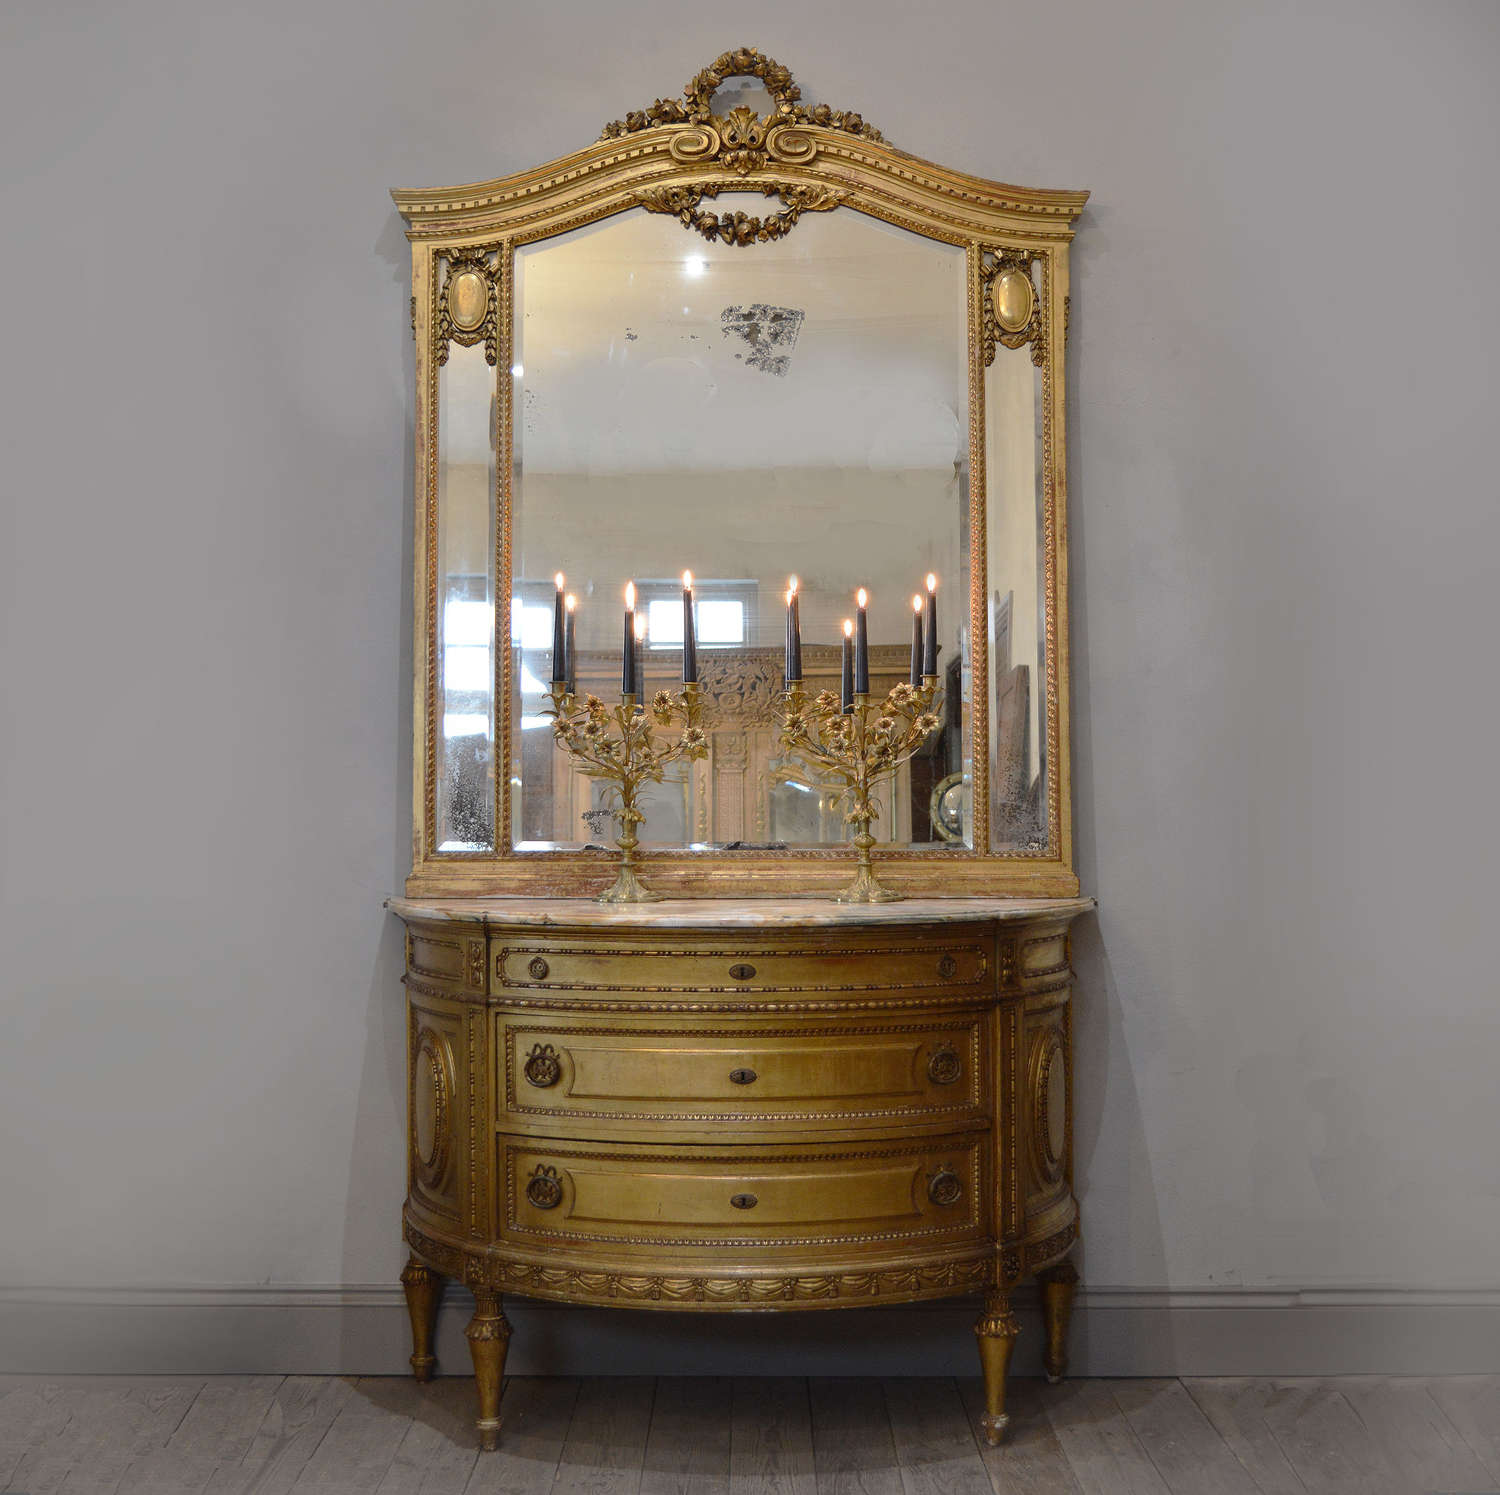 Grand scale giltwood demi-lune commode and mirror set by